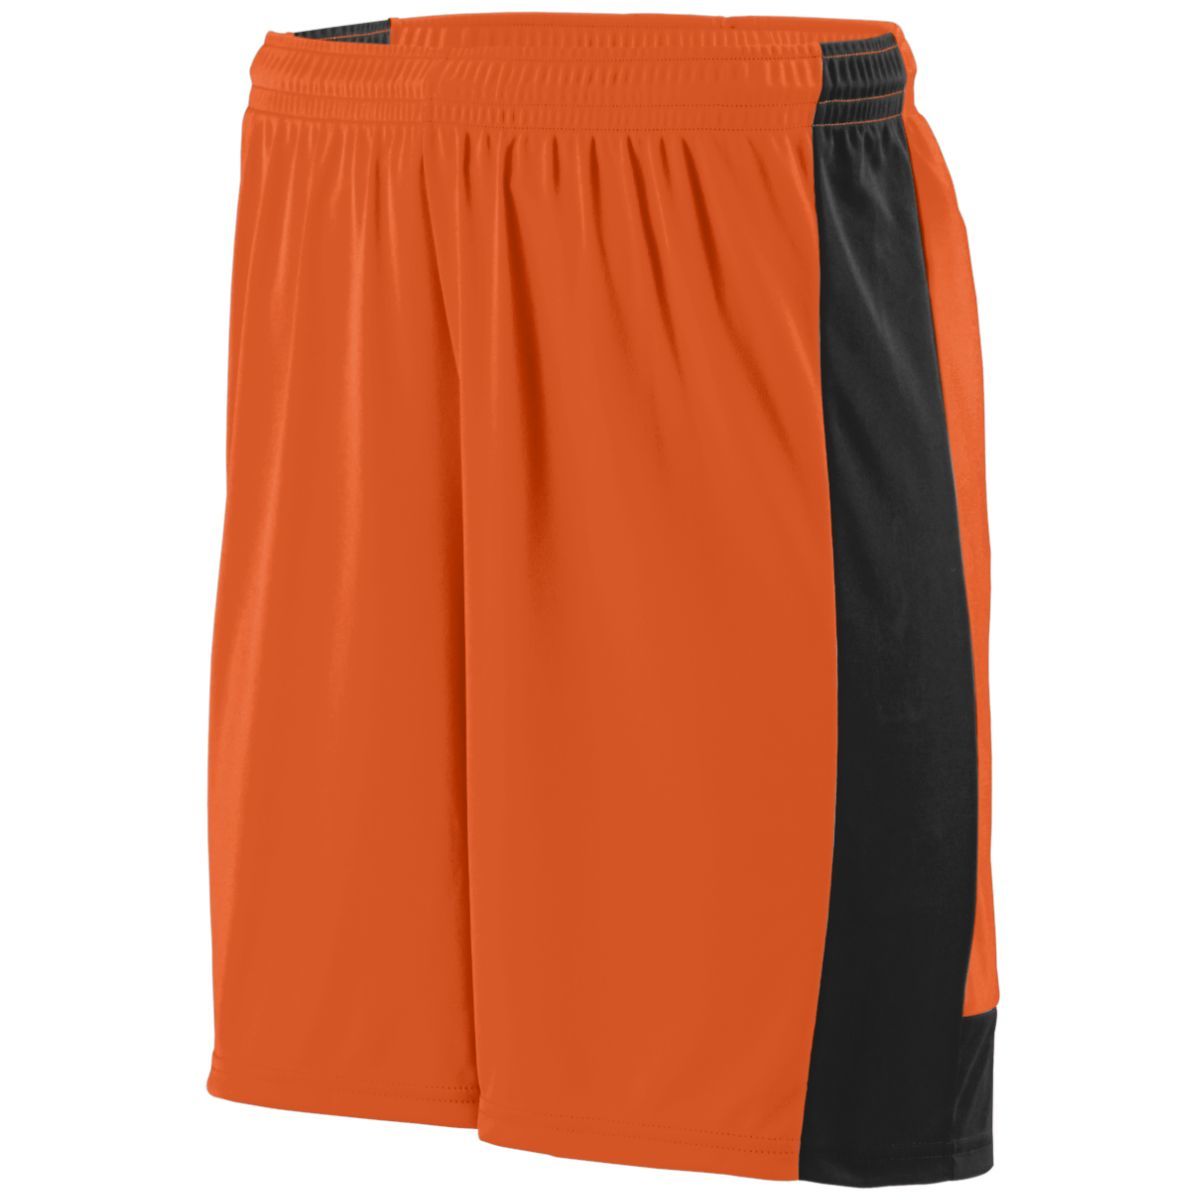 Augusta Sportswear Youth Lightning Shorts in Orange/Black  -Part of the Youth, Youth-Shorts, Augusta-Products, Soccer, All-Sports-1 product lines at KanaleyCreations.com